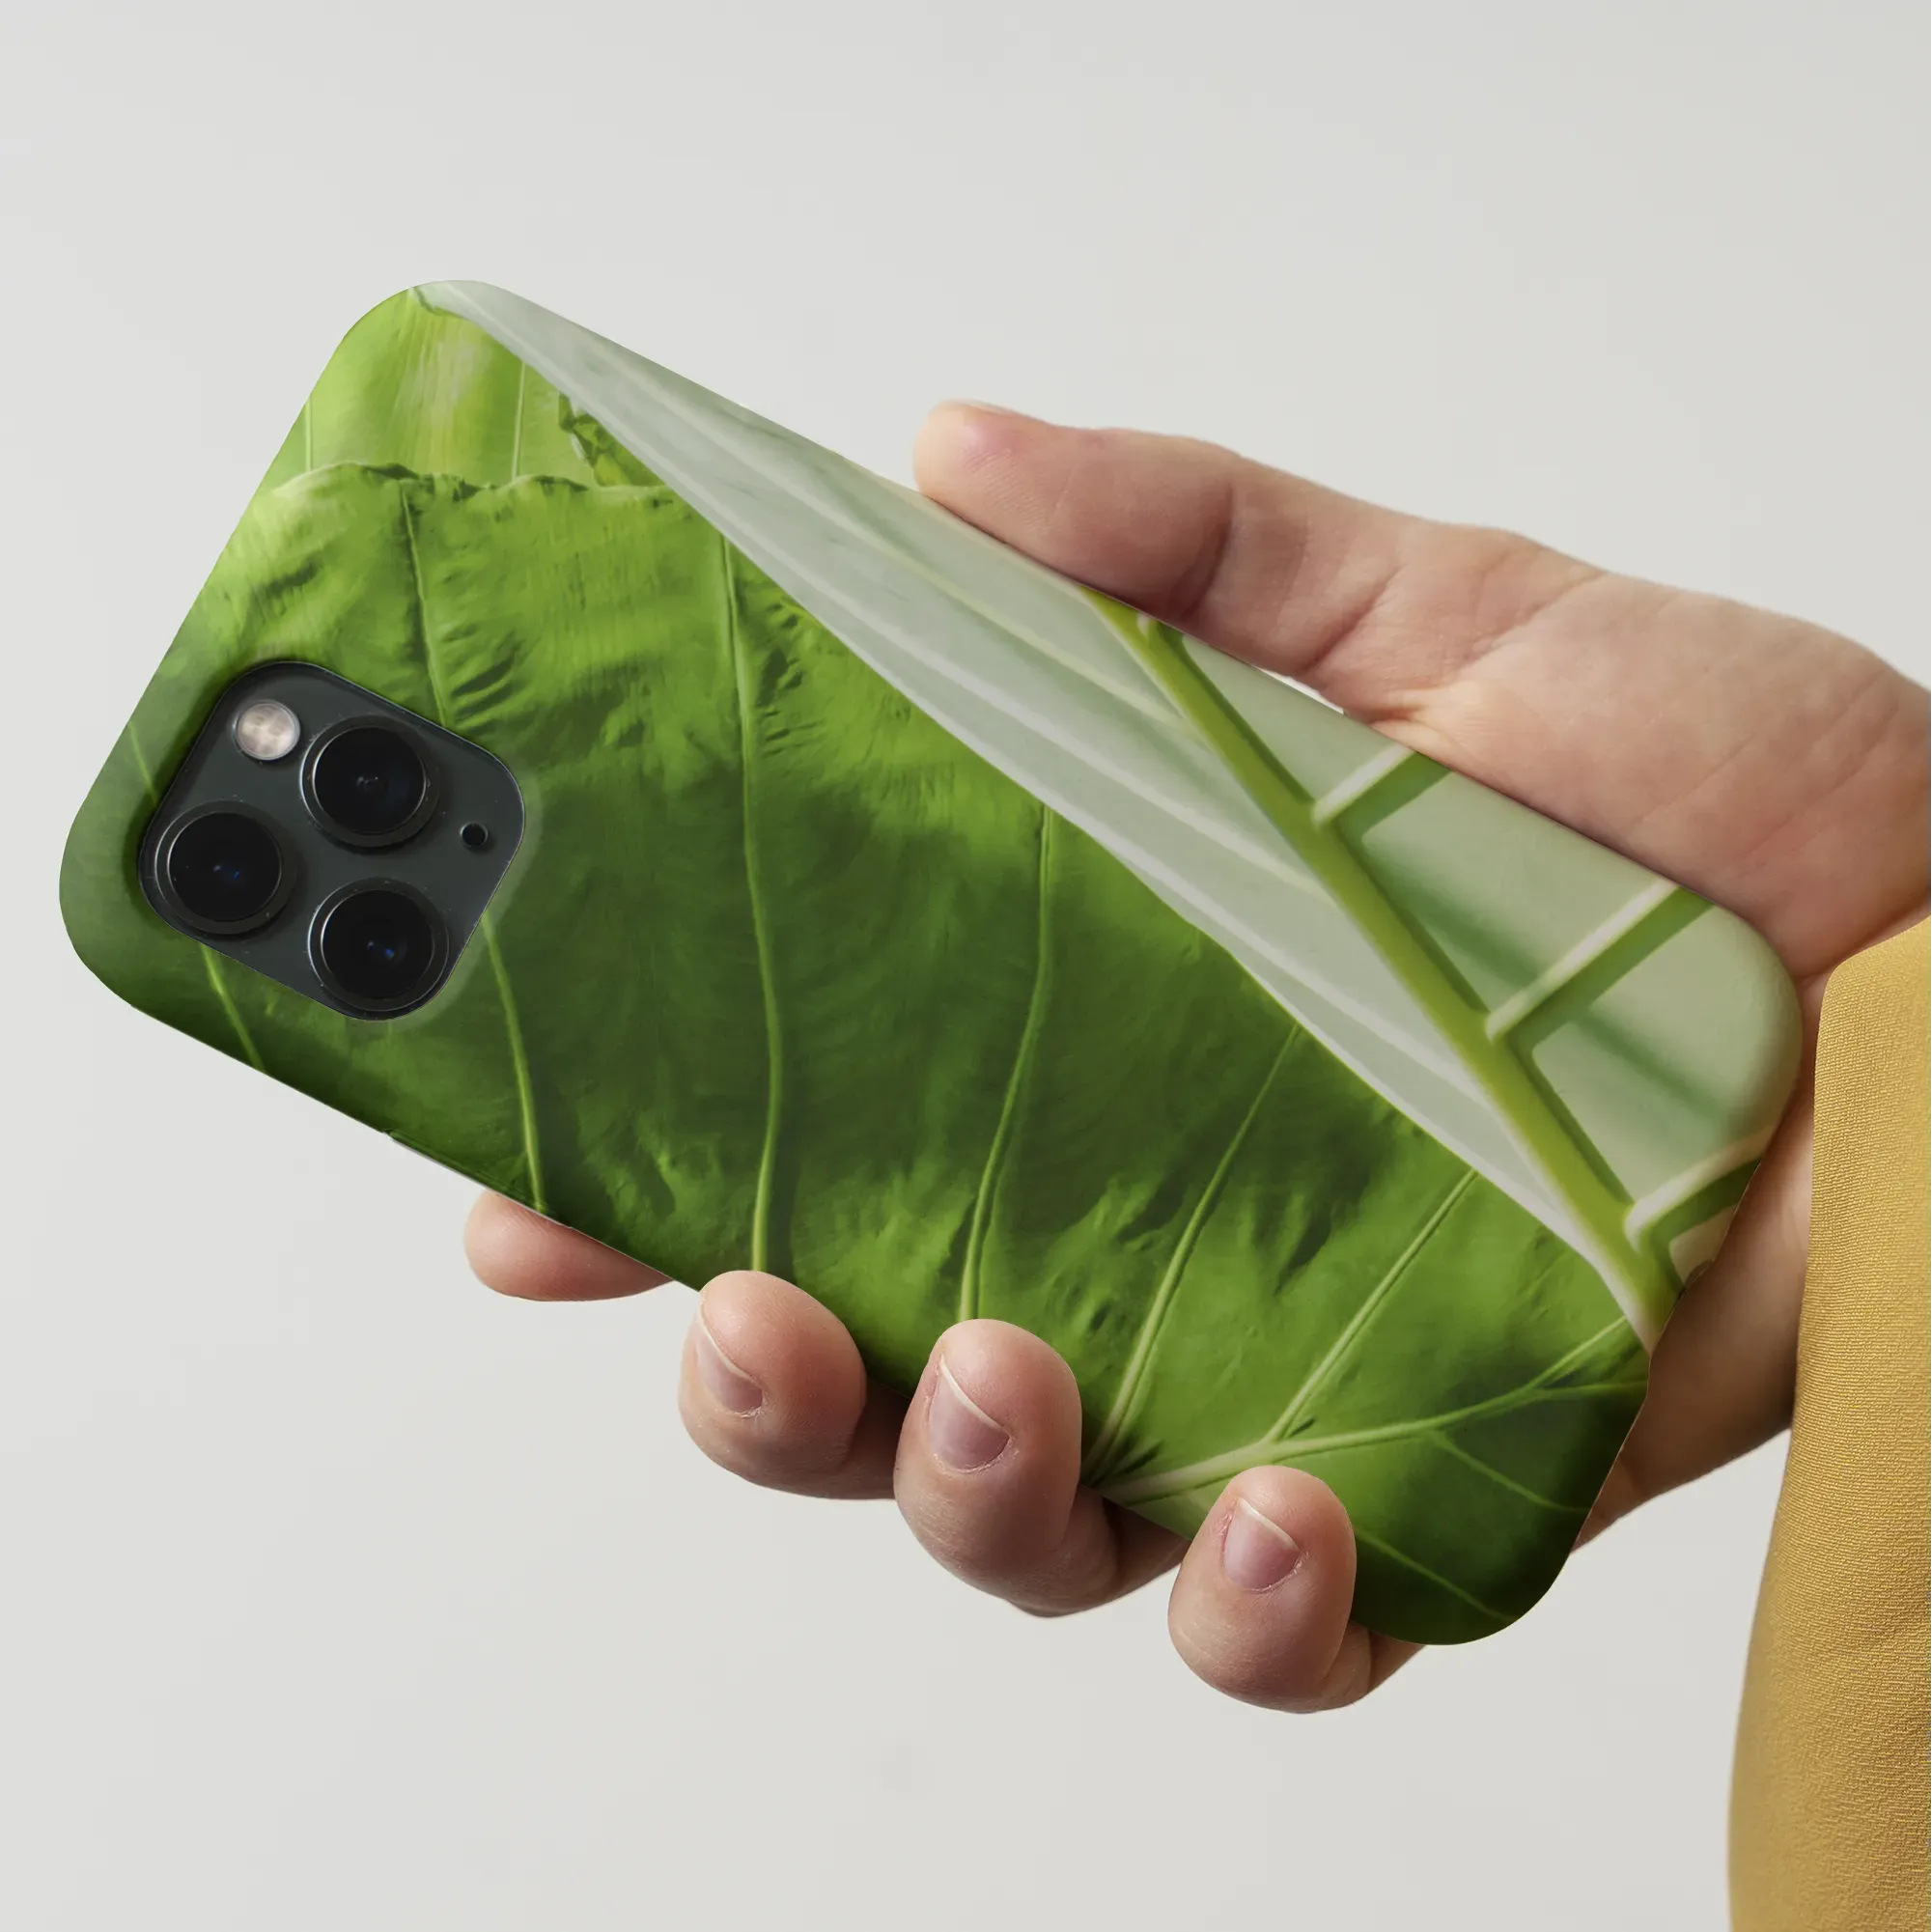 Clash Of The Hulks Tough Phone Case - Mobile Phone Cases - Aesthetic Art